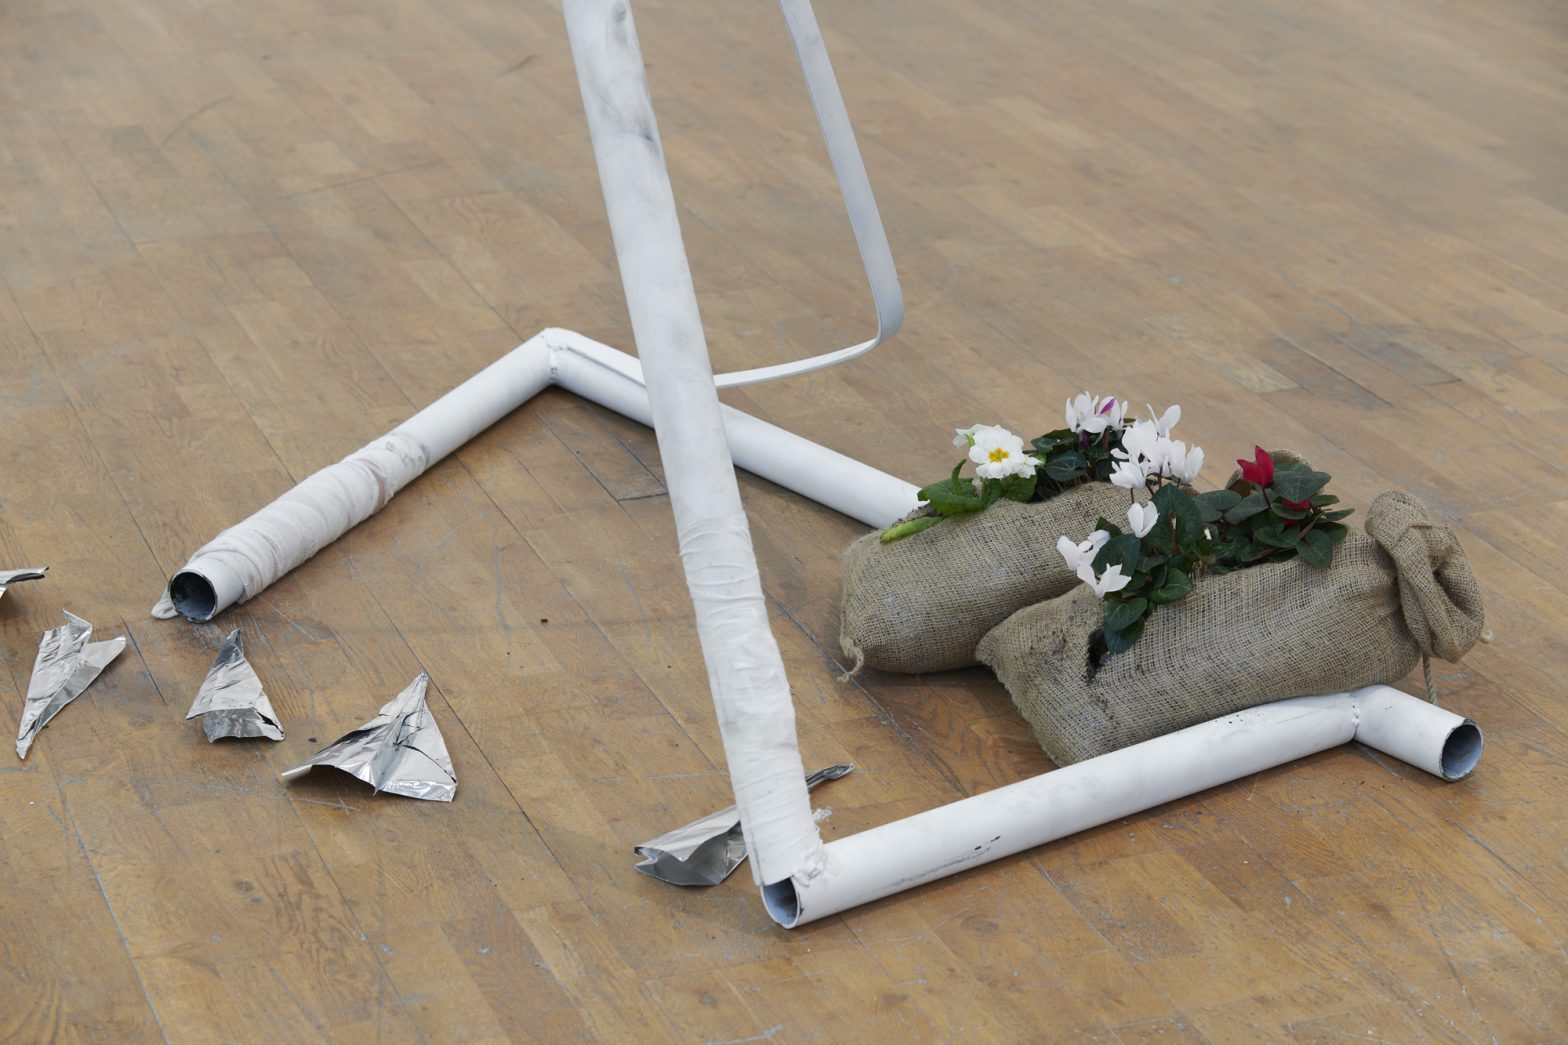 Two steel poles and two canvas bags containing brightly coloured flowers. Next to them are a scattering of tinfoil aeroplanes.